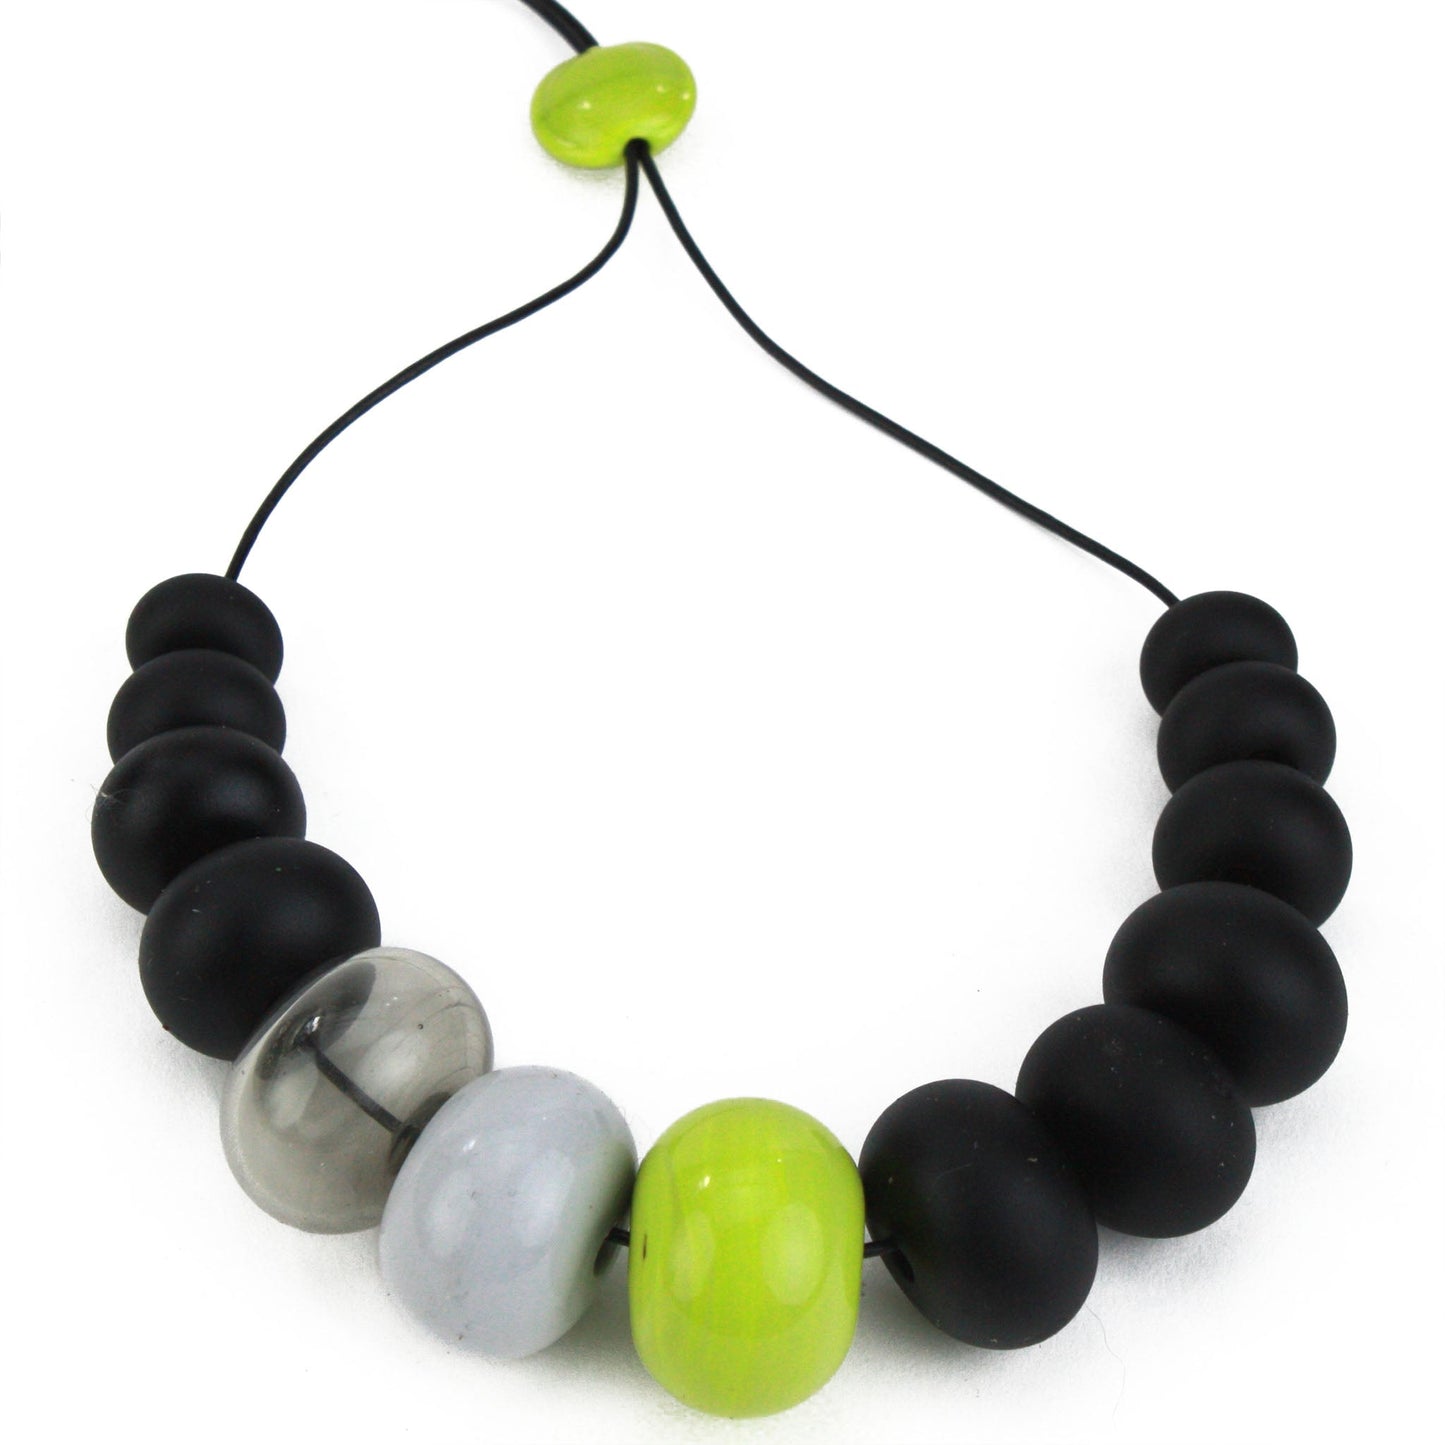 13 bead Bubble necklace - black, grey and green